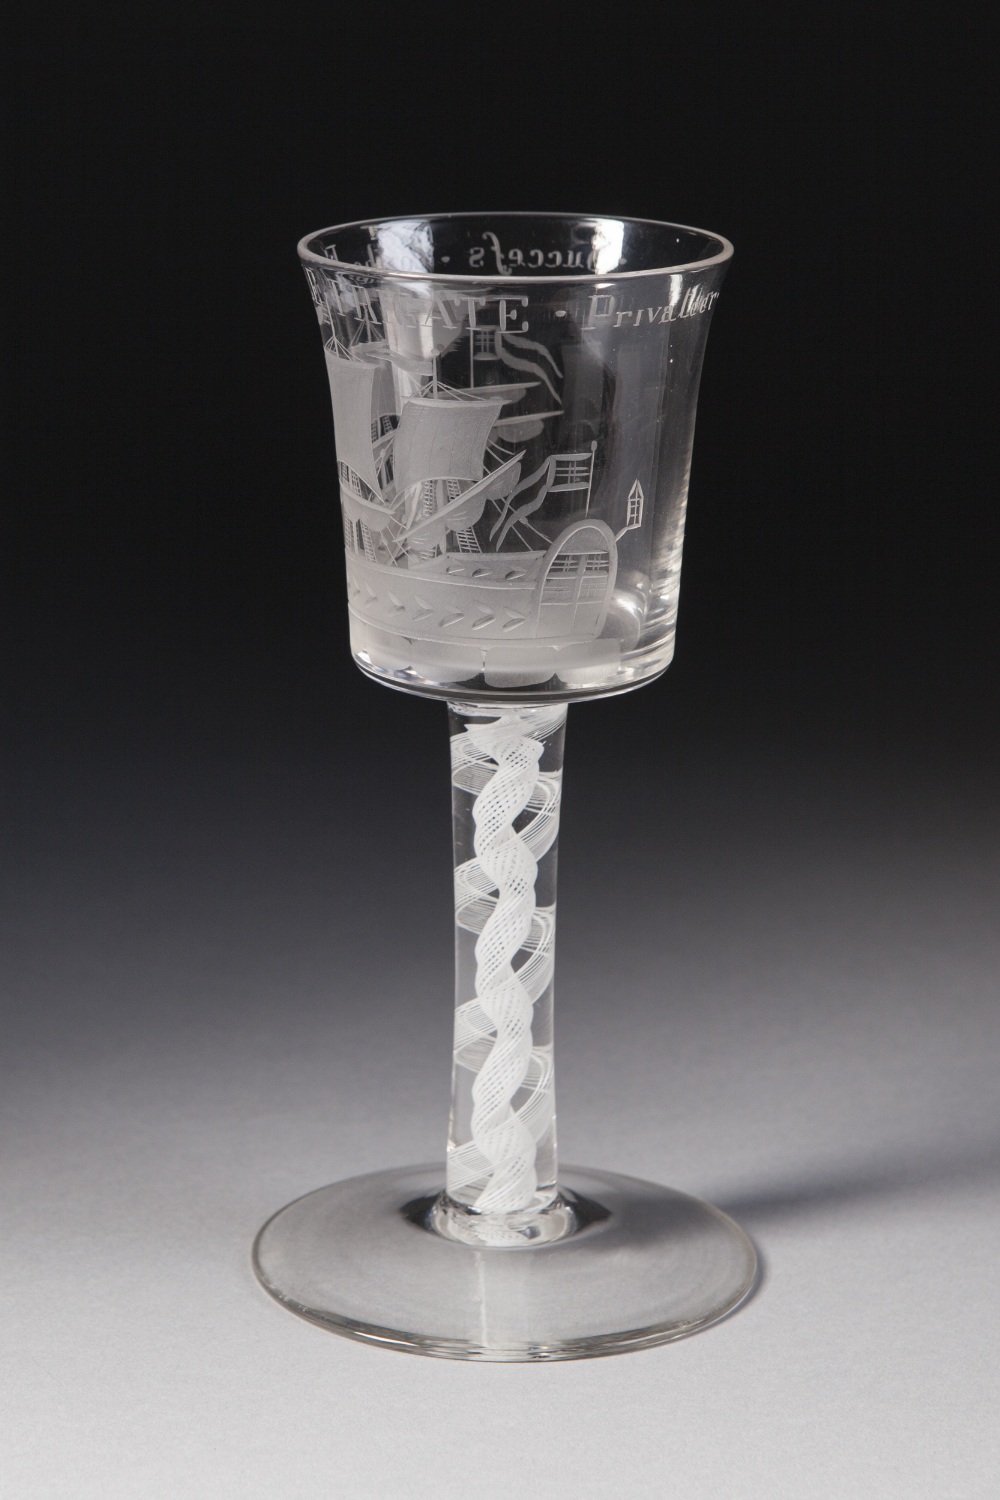 MODERN REPRODUCTION OF AN 18th CENTURY PRIVATEER WINE GLASS FOR THE EAGLE FRIGATE, the slightly - Image 2 of 2